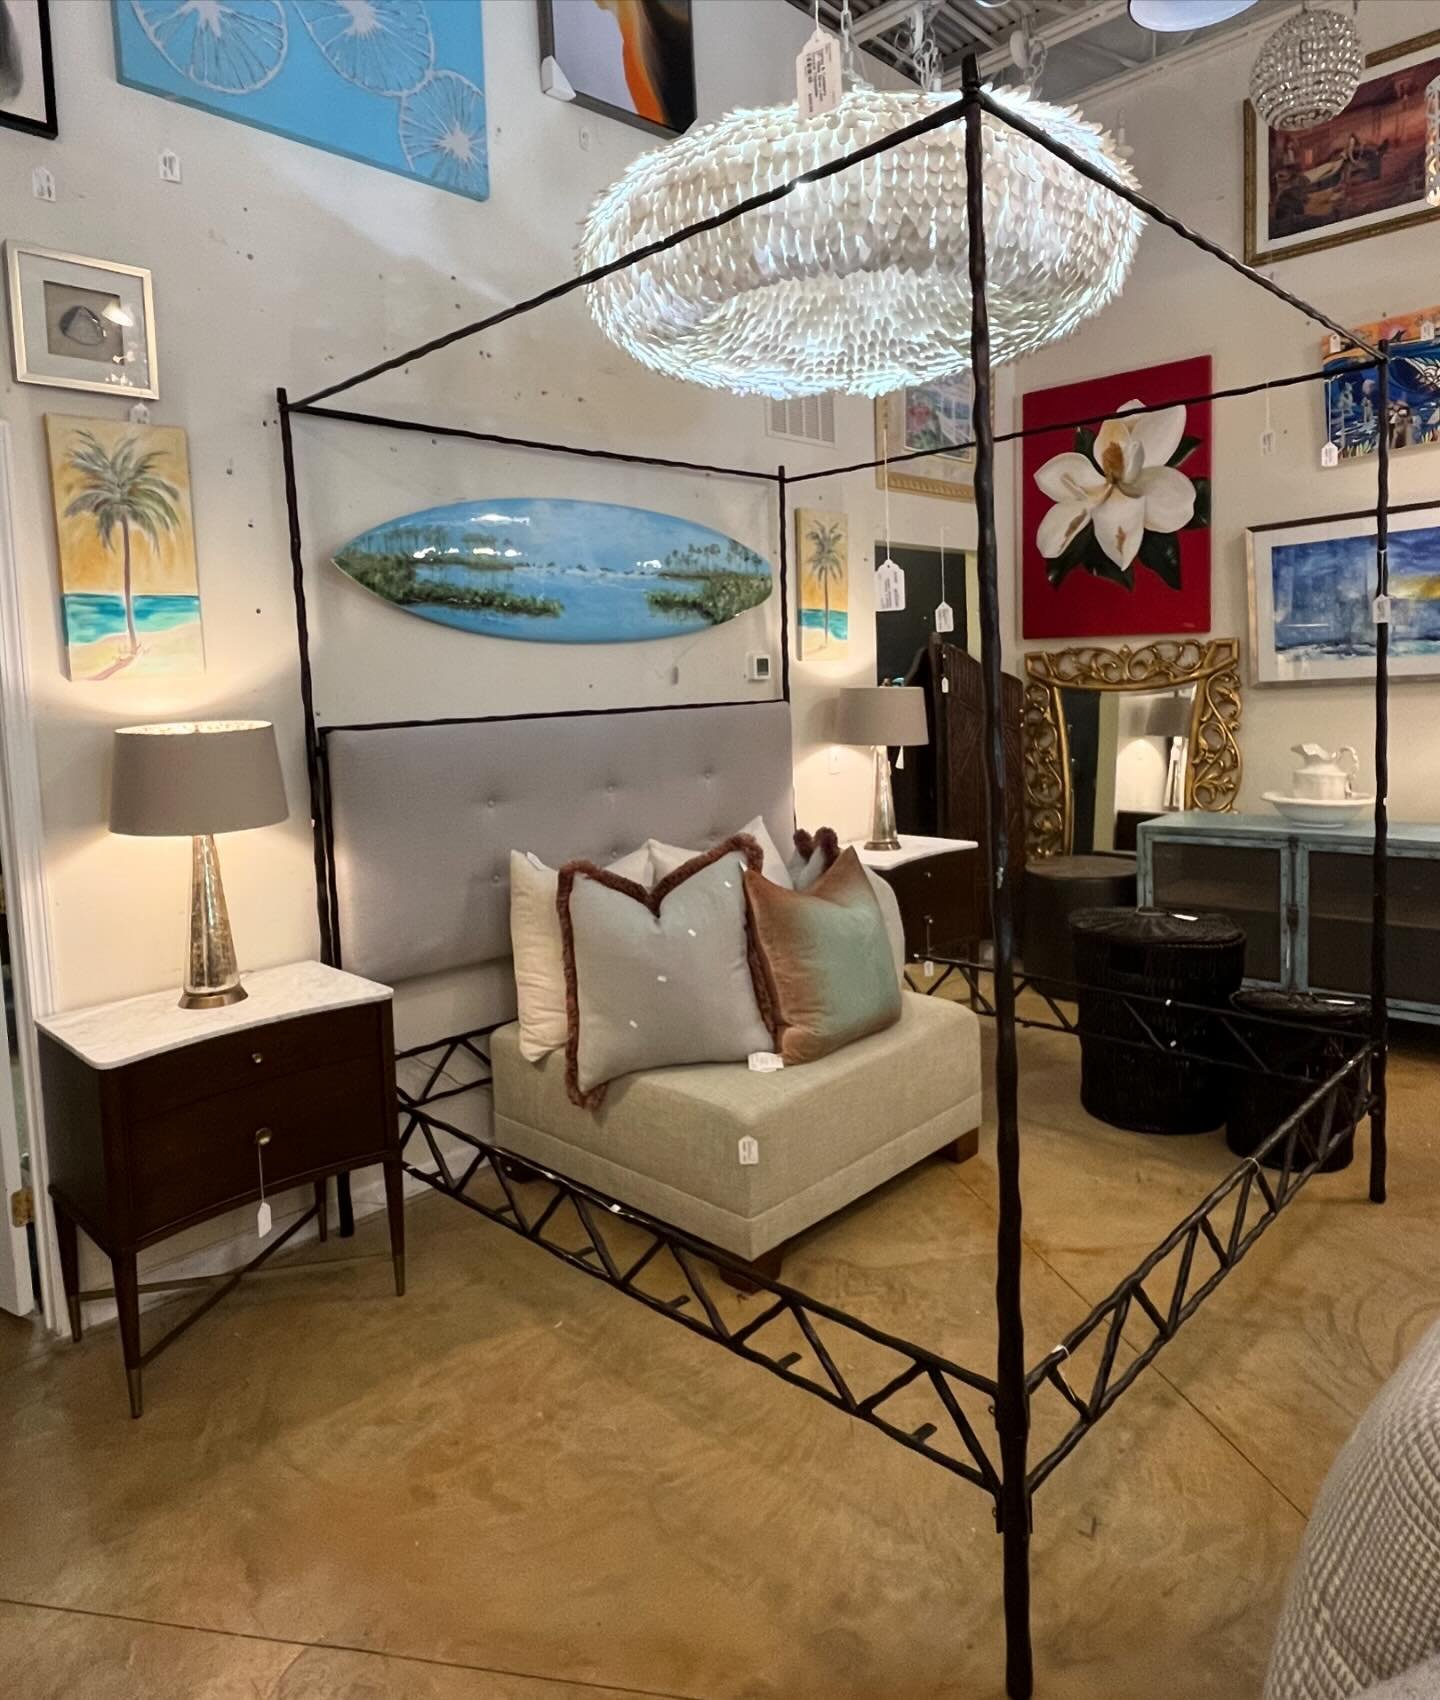 WOWOW 🤩 
We have this beautiful Mecox Mandy King Four Poster Twisted Metal Canopy Bed 😲 Retail $8850 ❌ Our Price $3995 ✨

Hung above is The Western Lake 6&rsquo; Surfboard - Original by Annette Taunton 😍 Just Reduced from $3195 to $2395 

#resortr